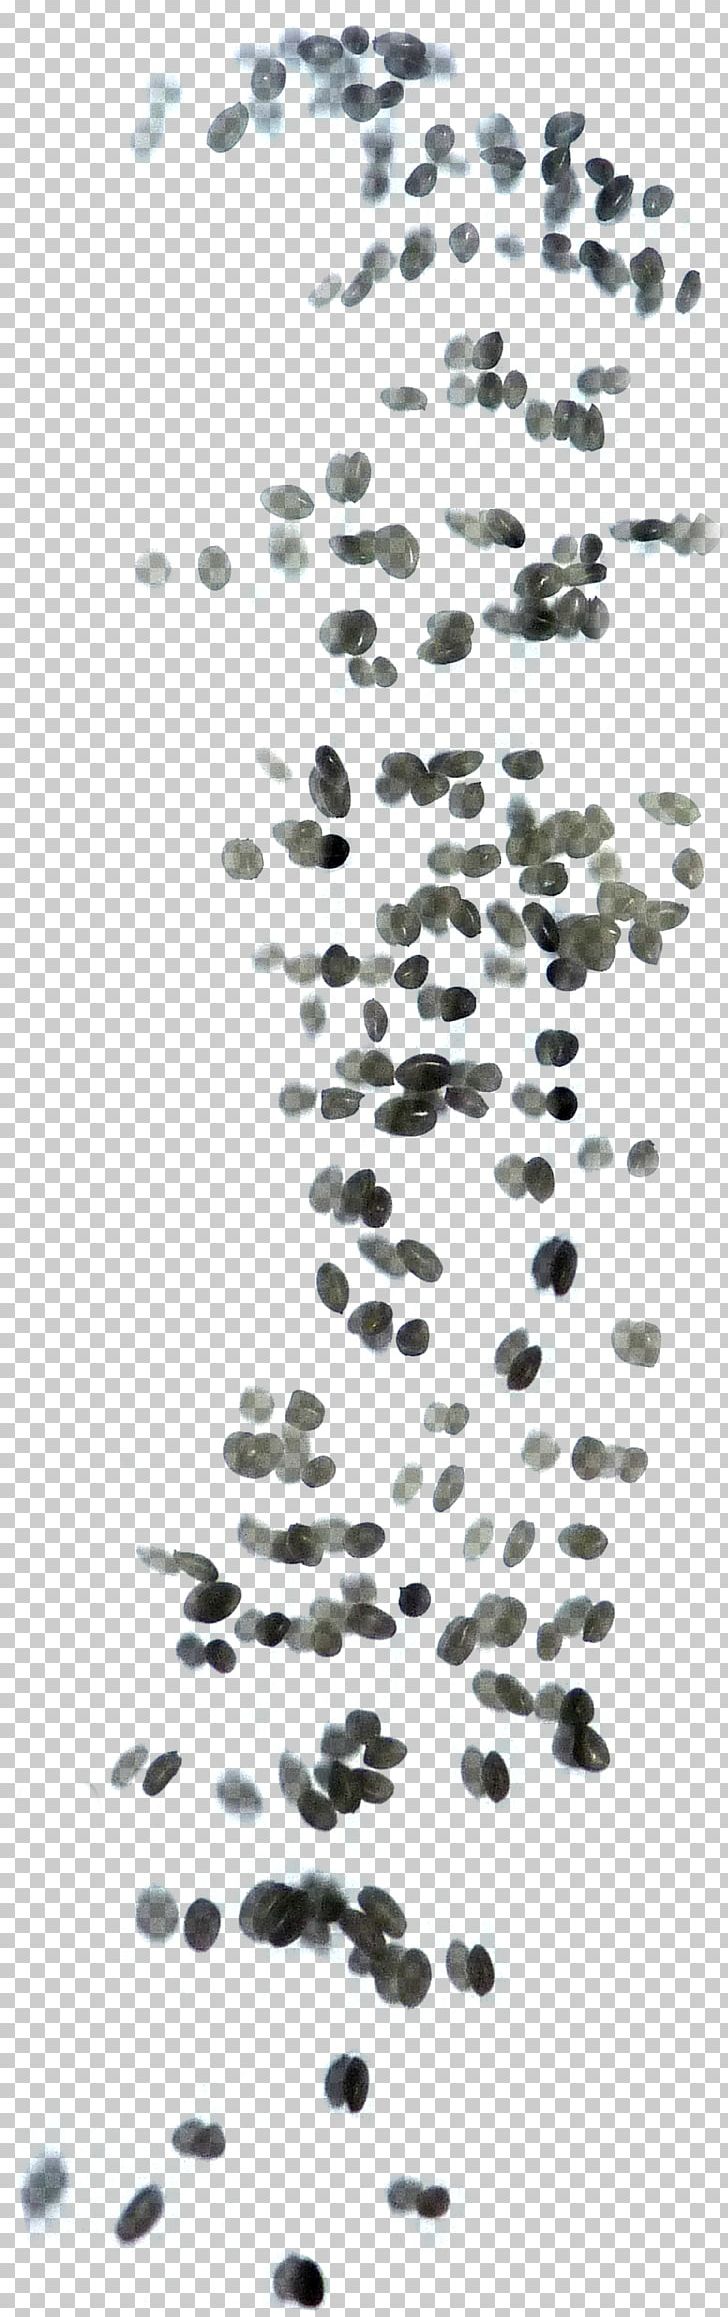 Thermoplastic Elastomer Transparency And Translucency Material Opacity PNG, Clipart, Black And White, Cop, Elastomer, Epdm Rubber, Hardness Free PNG Download